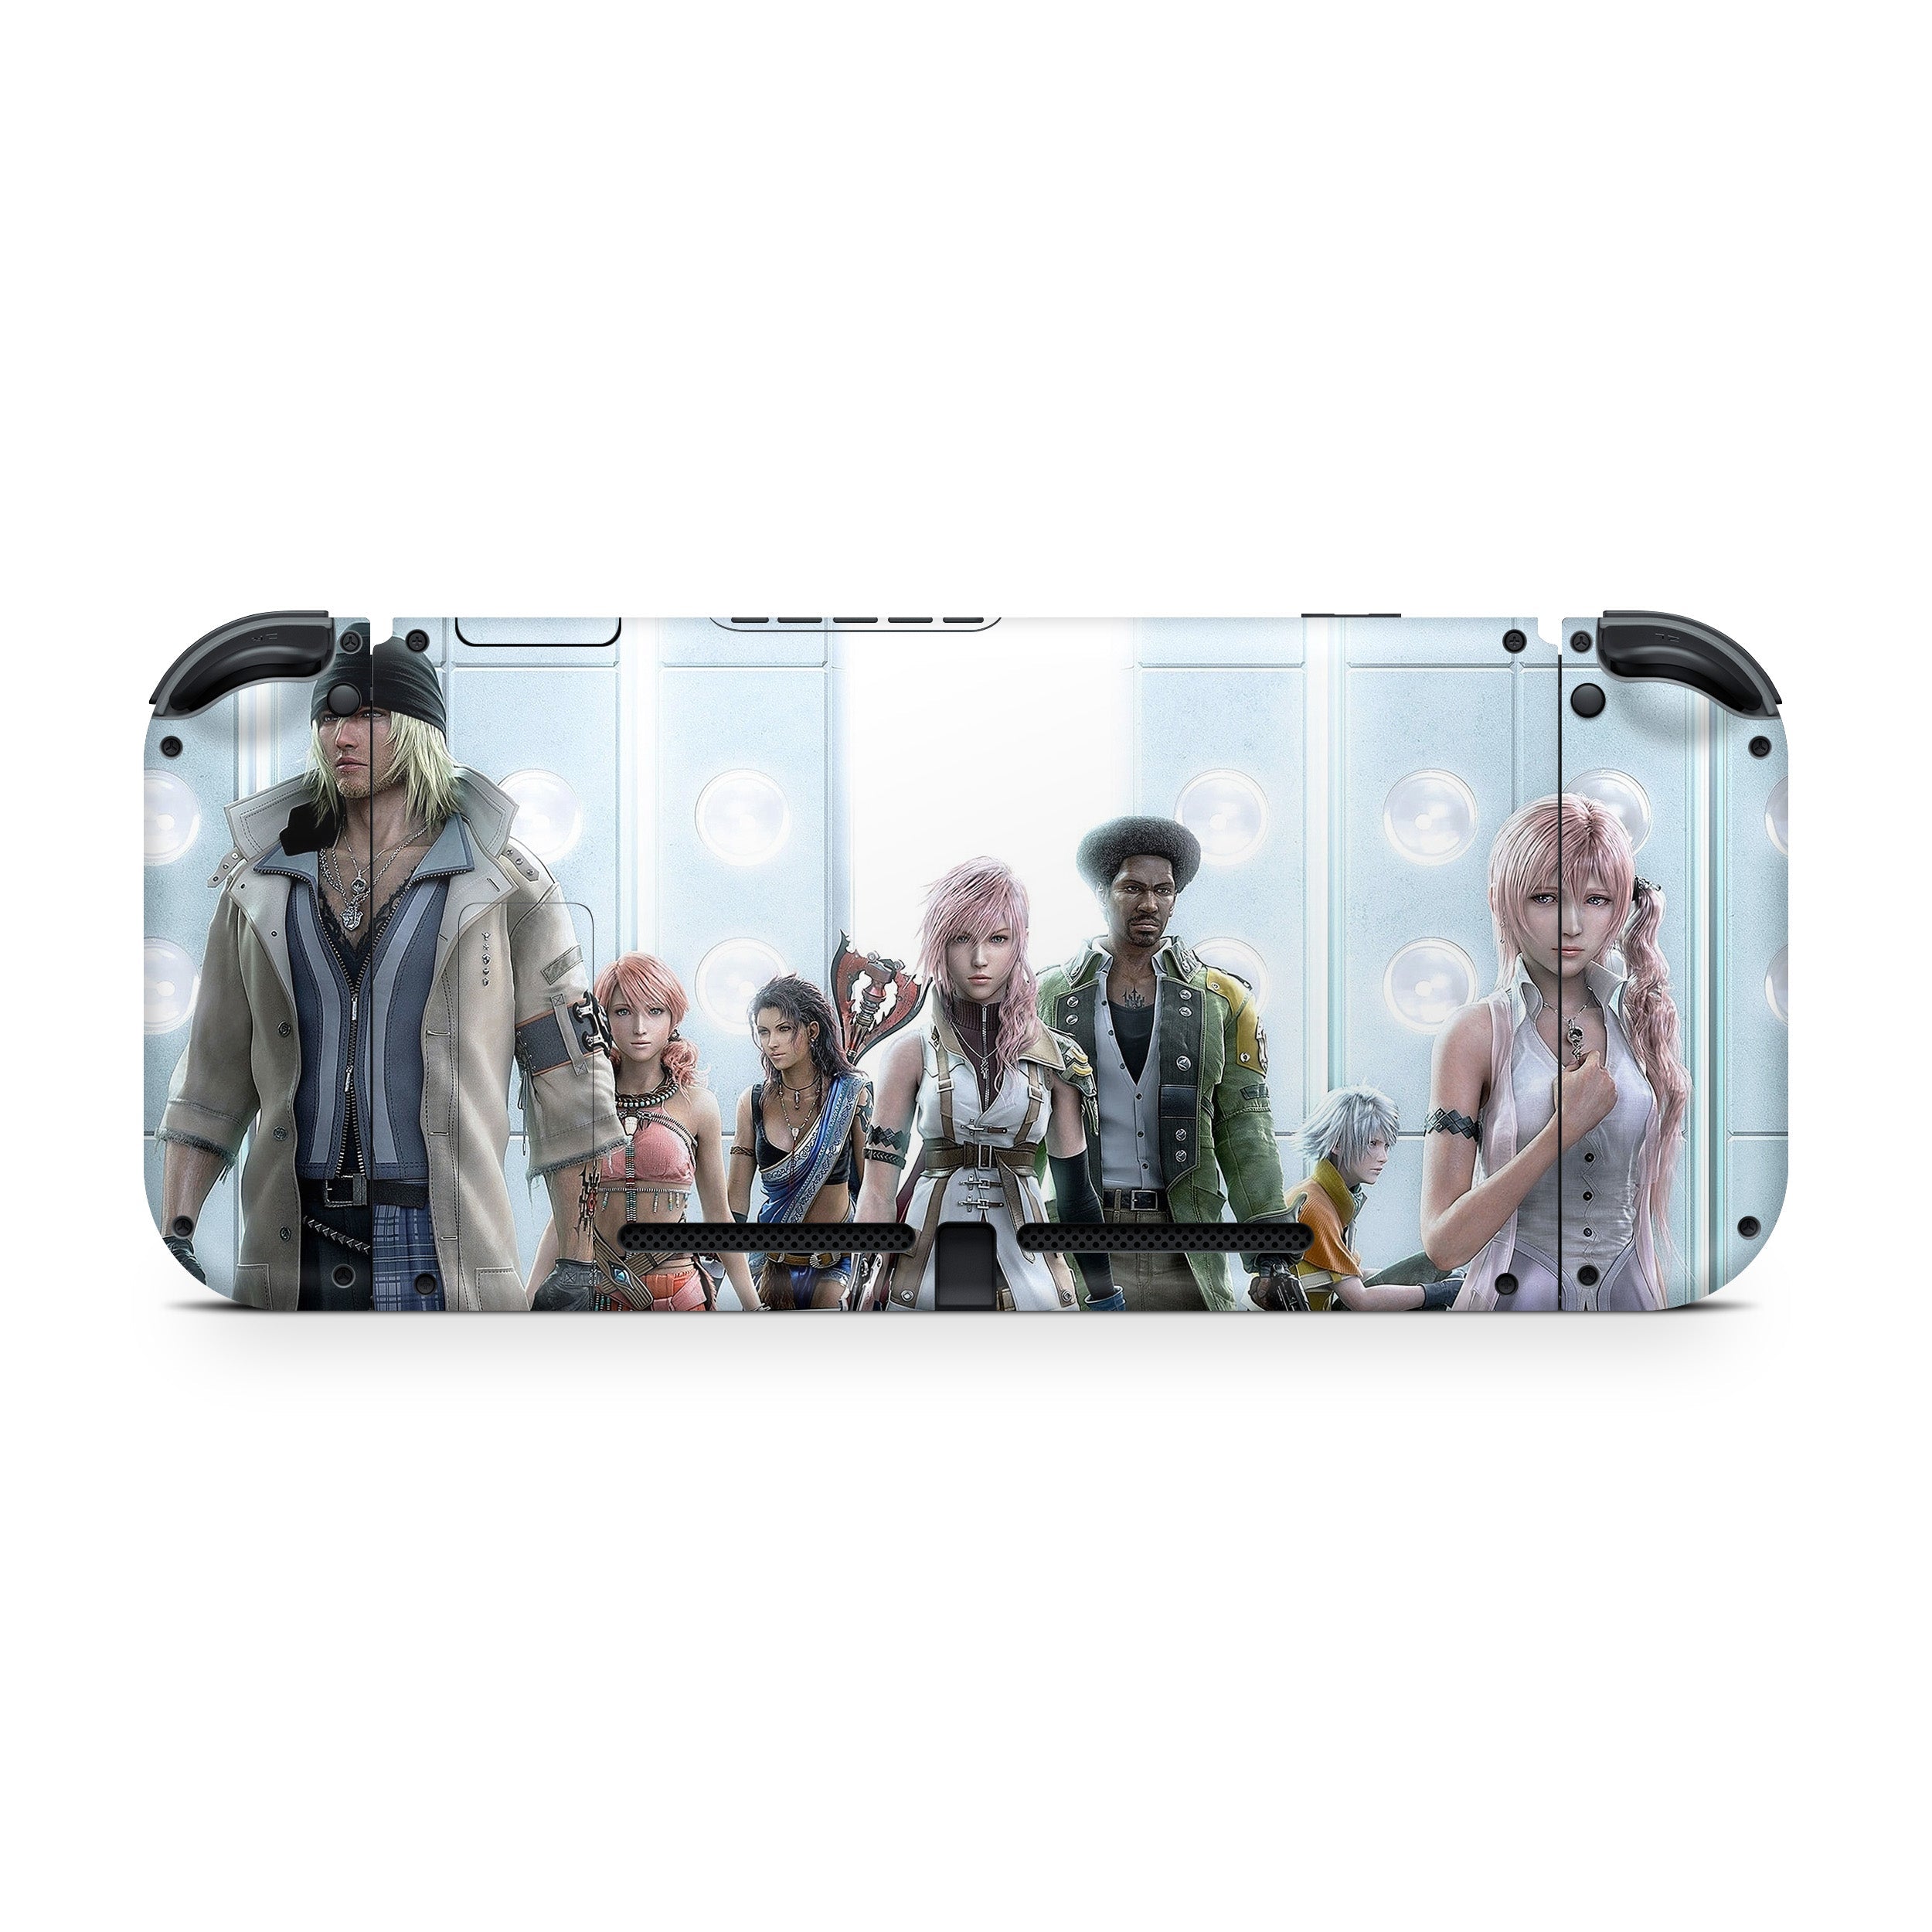 A video game skin featuring a Final Fantasy 13 Squad design for the Nintendo Switch.